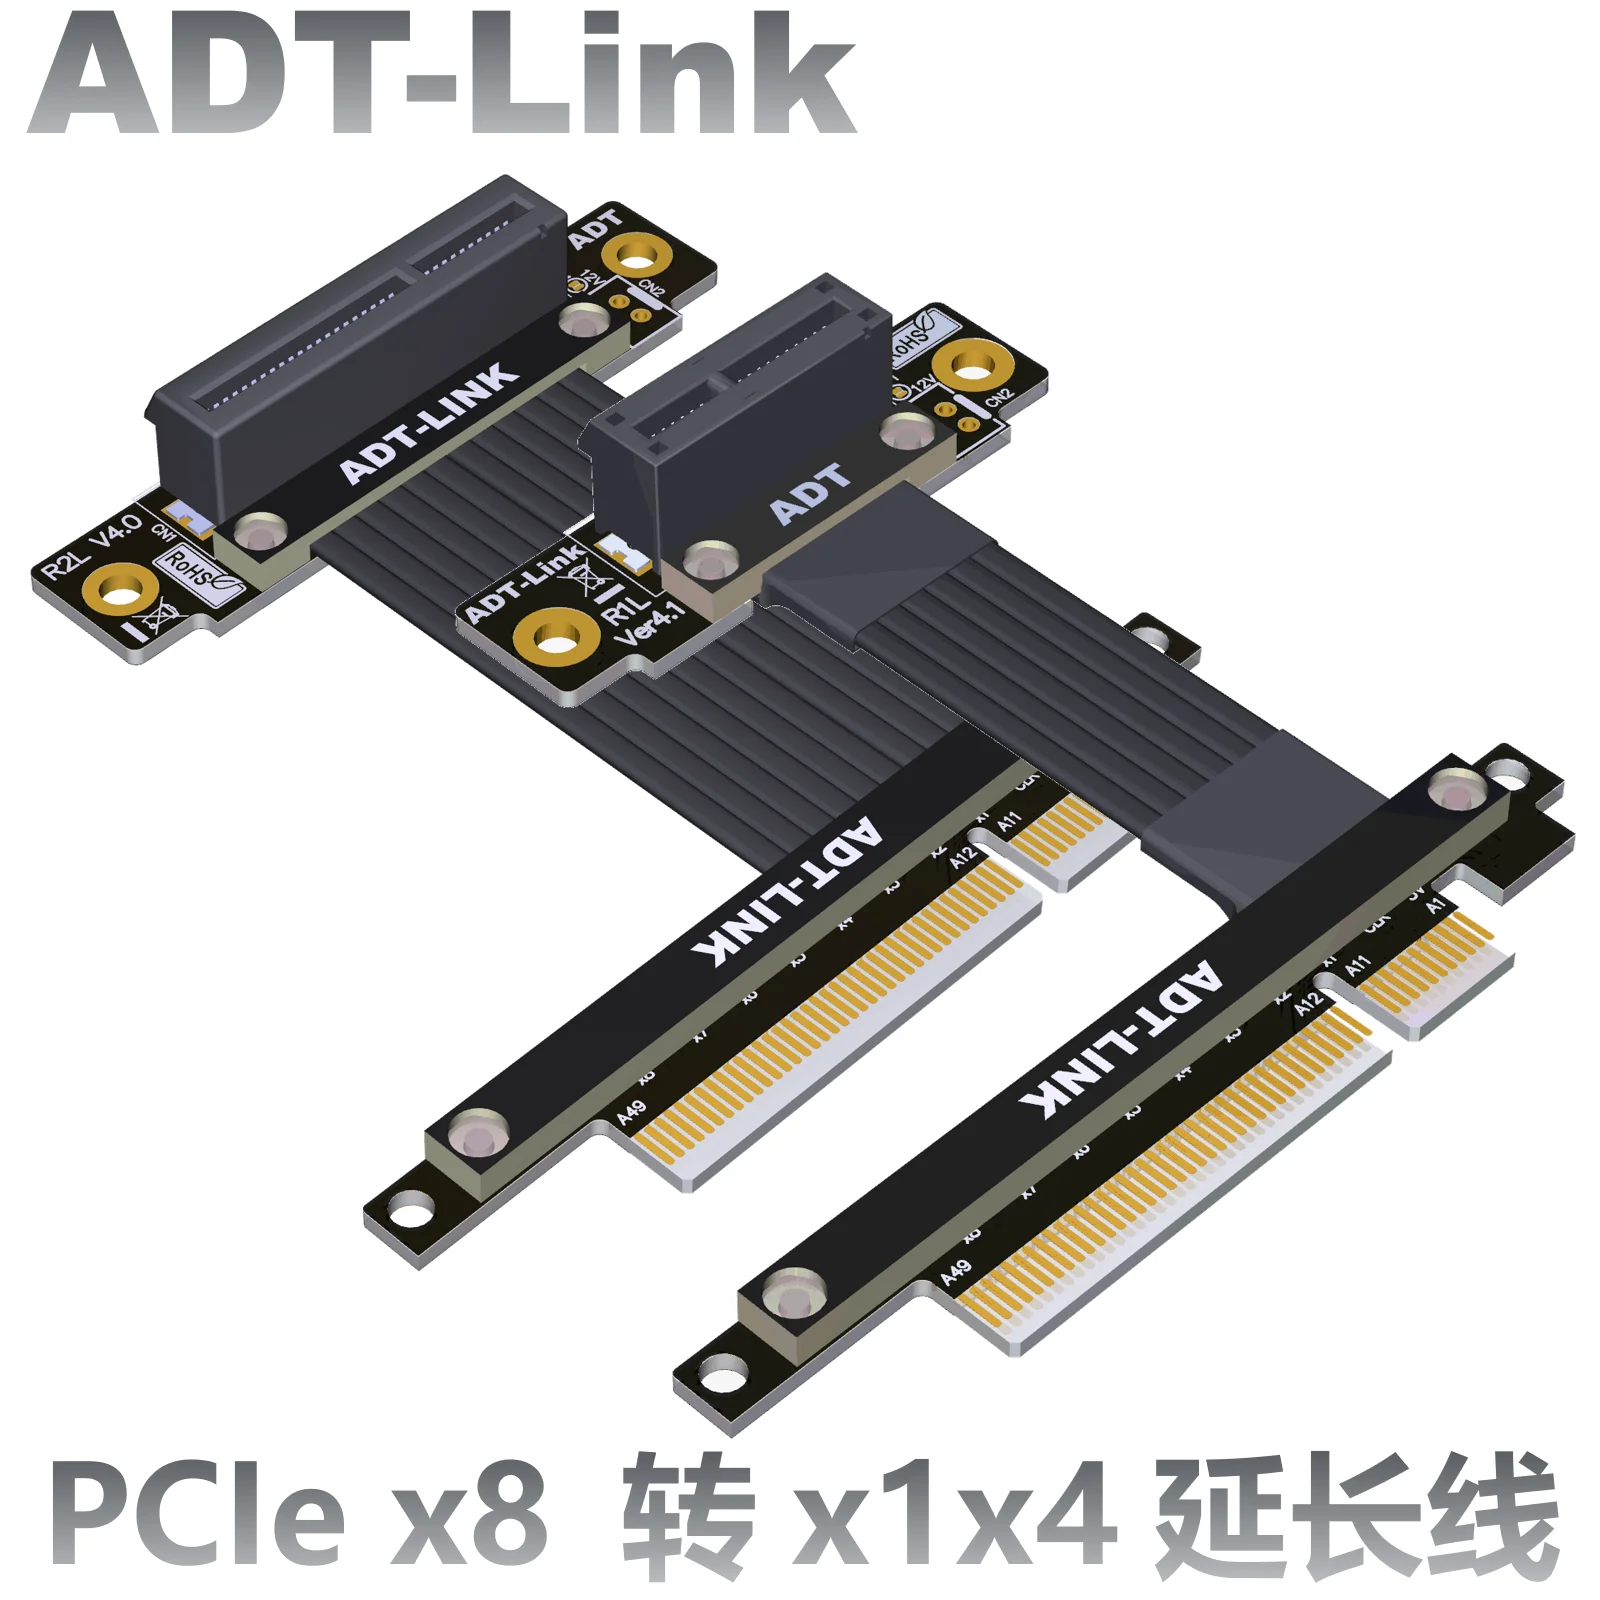 

ADT New PCI Express 4.0 3.0 x8 to x1 x4 Riser Extension Cable PCI-E x8 to x1 x4 SSD Riser Network Card Adapter for 1x 4x 8x Slot